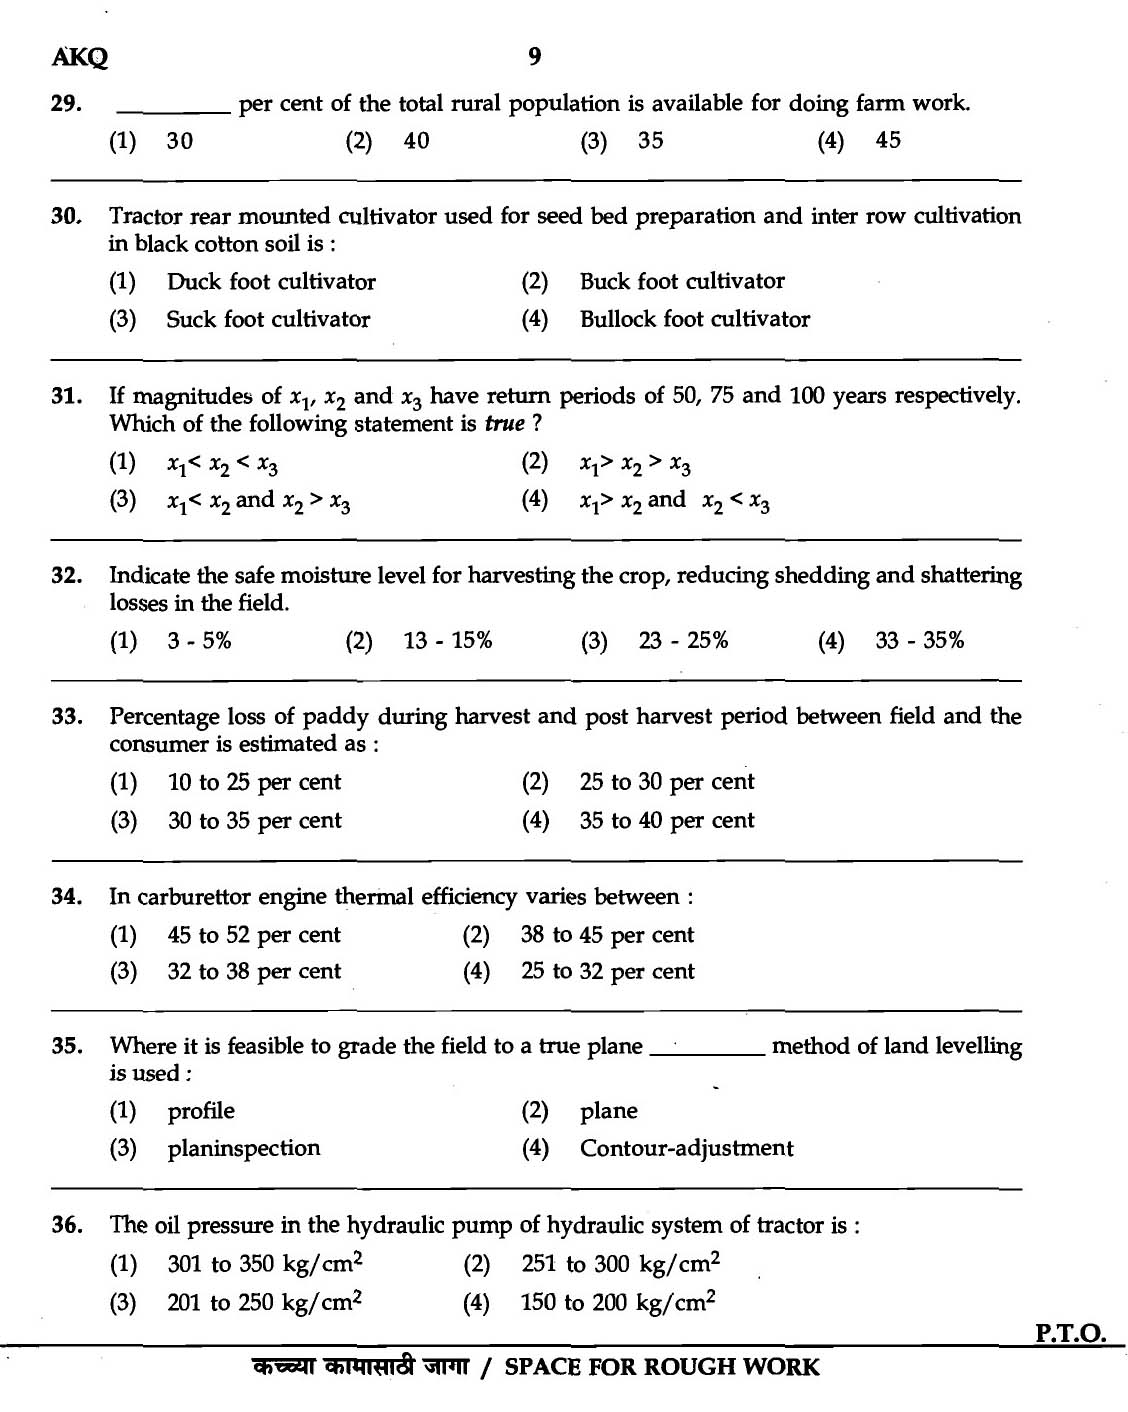 MPSC Agricultural Services Exam 2007 Question Paper Agricultural Engineering 7